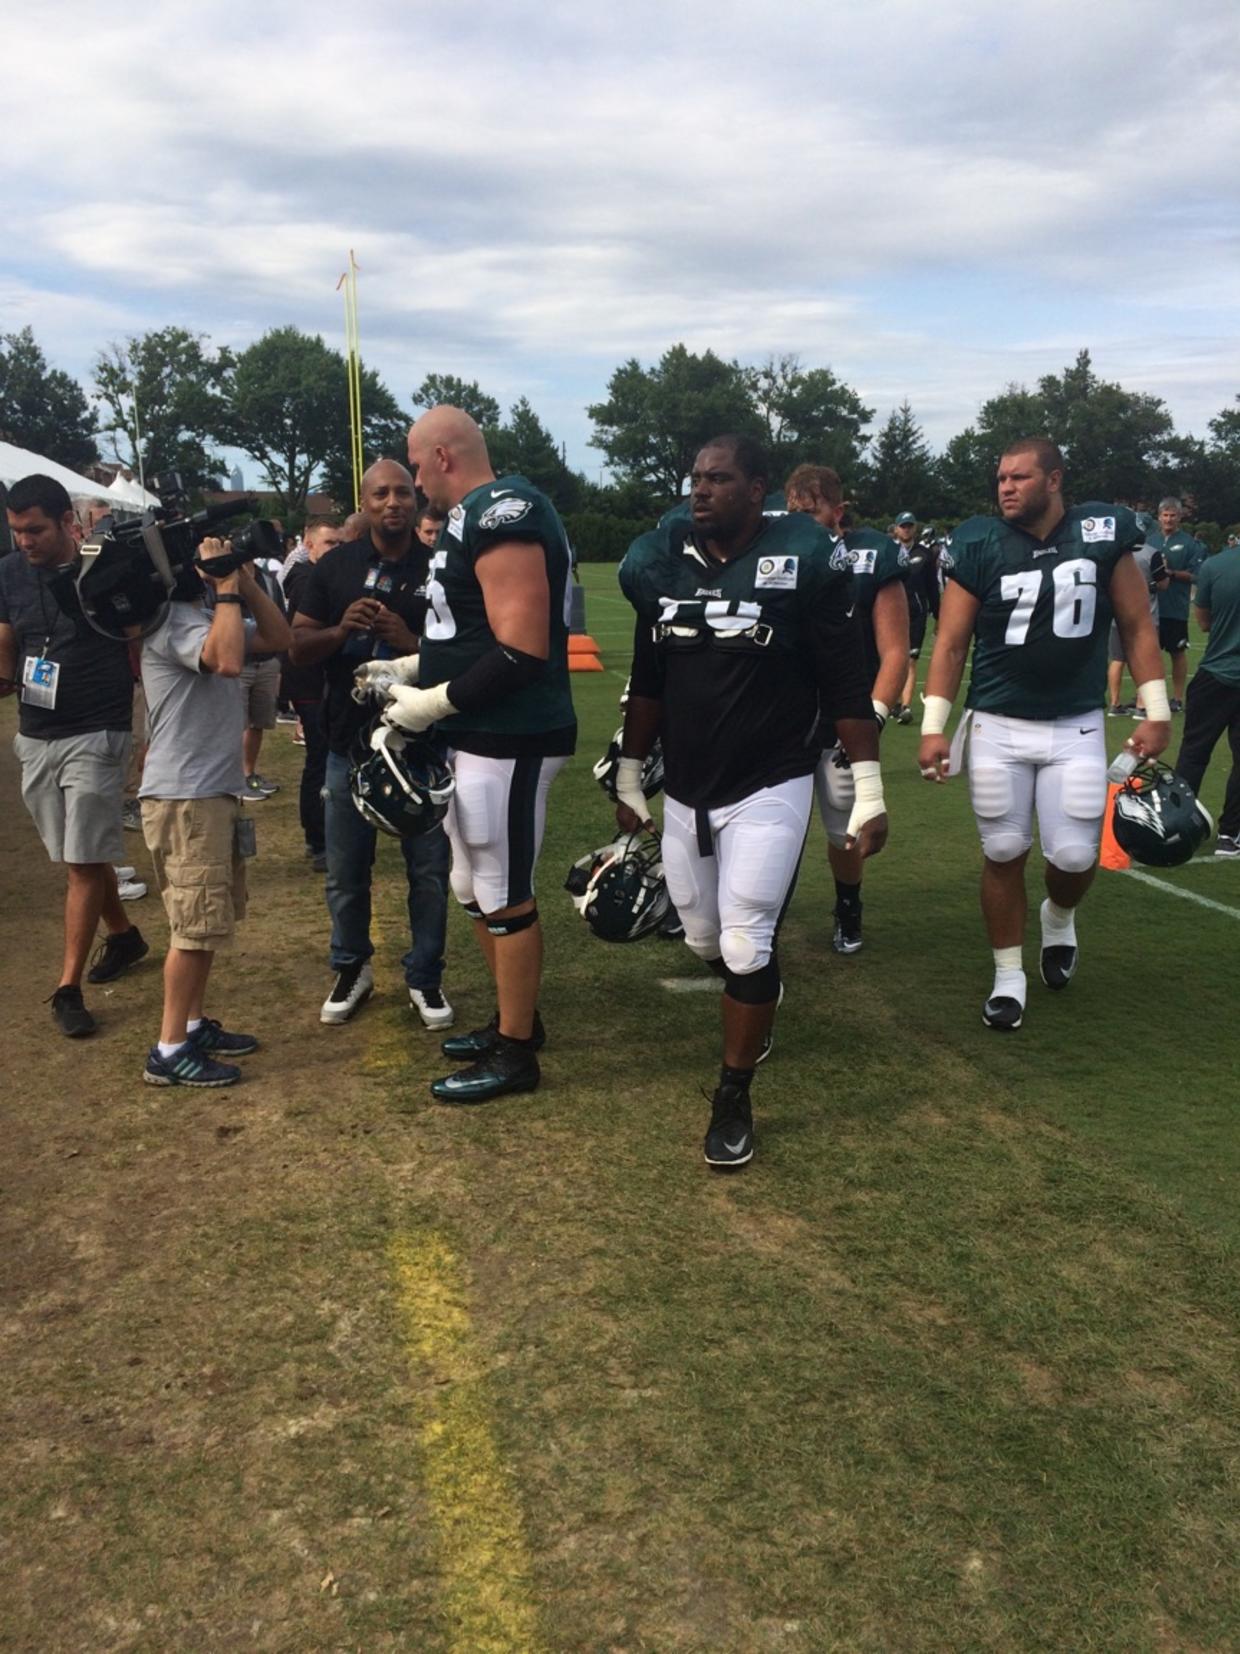 Pads Come On As Eagles Training Camp Continues: 'It Felt Great' - CBS